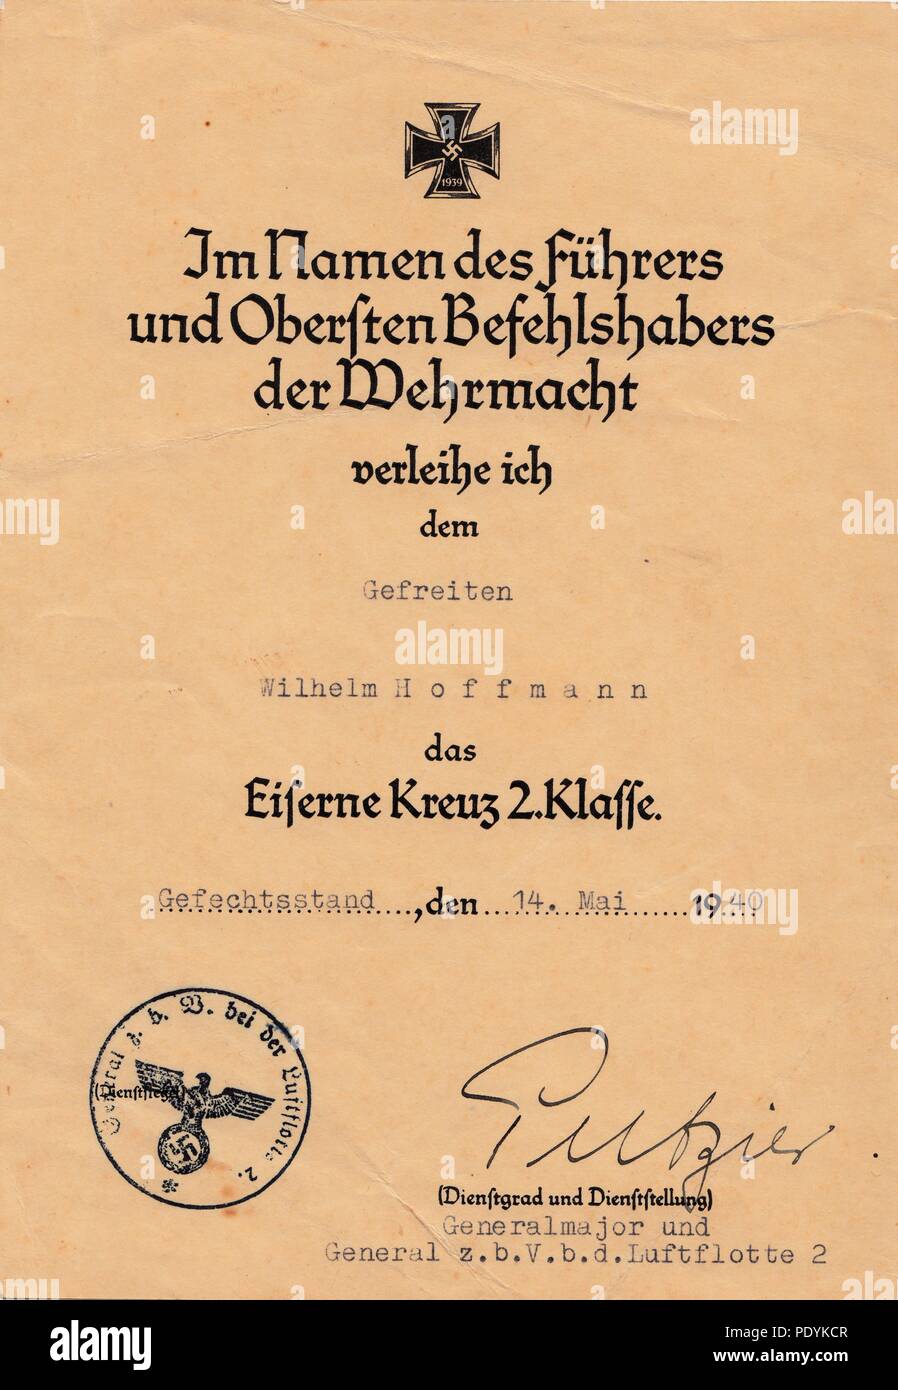 Certificate awarded to Feldwebel Willi Hoffmann of 5. Staffel, Kampfgeschwader 30: Certificate for the Iron Cross 2nd Class, awarded to Gefreiter Willi Hoffmann of 5./KG 30 on 14th May 1940. it is signed in ink by Generalmajor Richard Putzier, General for Special Duties in Luftflotte 2. Stock Photo